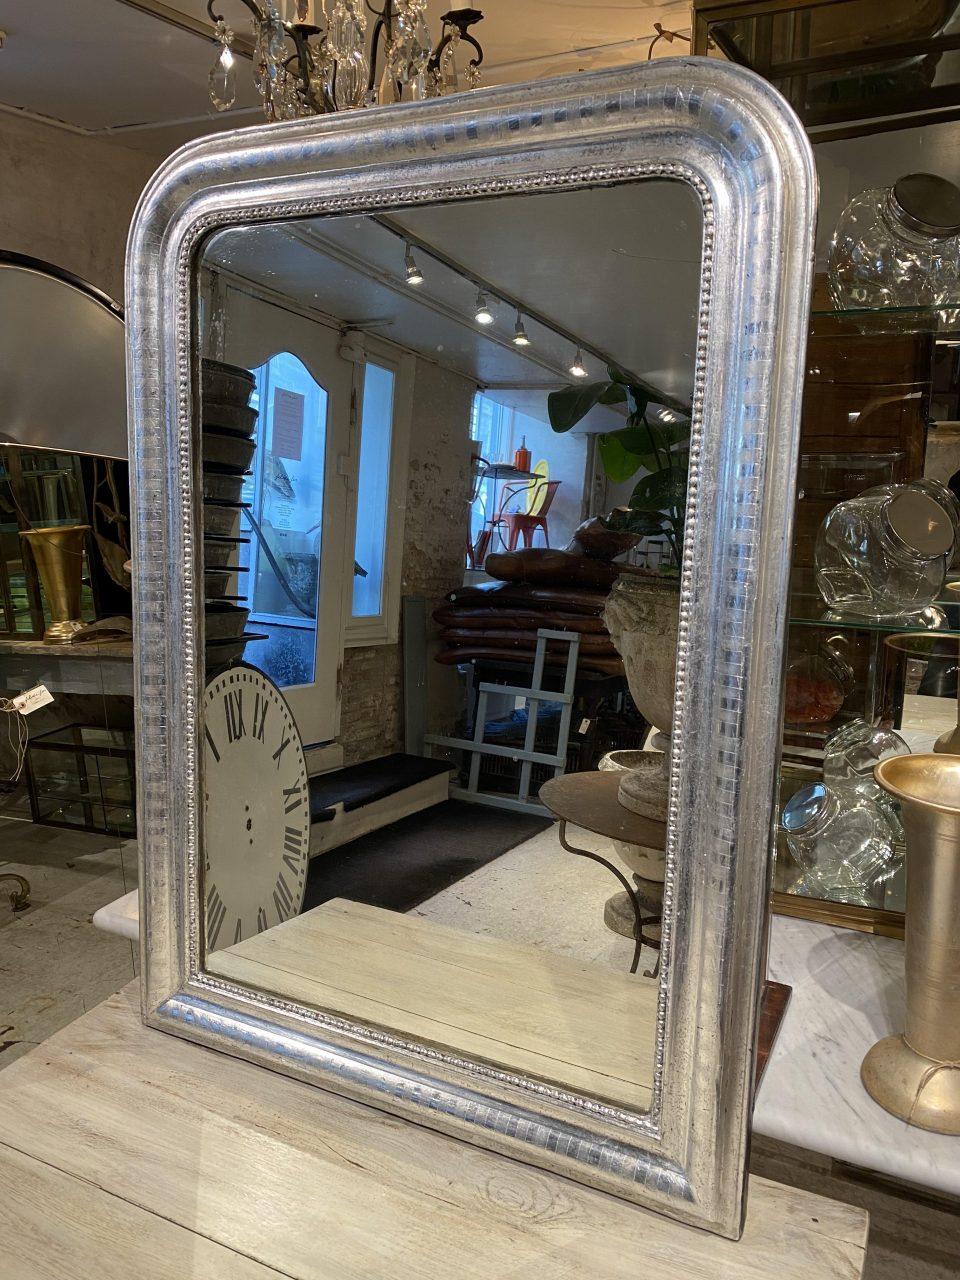 Beautiful antique French Louis Phillipe silver mirror from the 1860s. Louis Phillipe mirrors are characterized by their curvaceous wide frames with rounded corners and wonderfully elegant profiles. Often used on mantlepieces.

This piece still